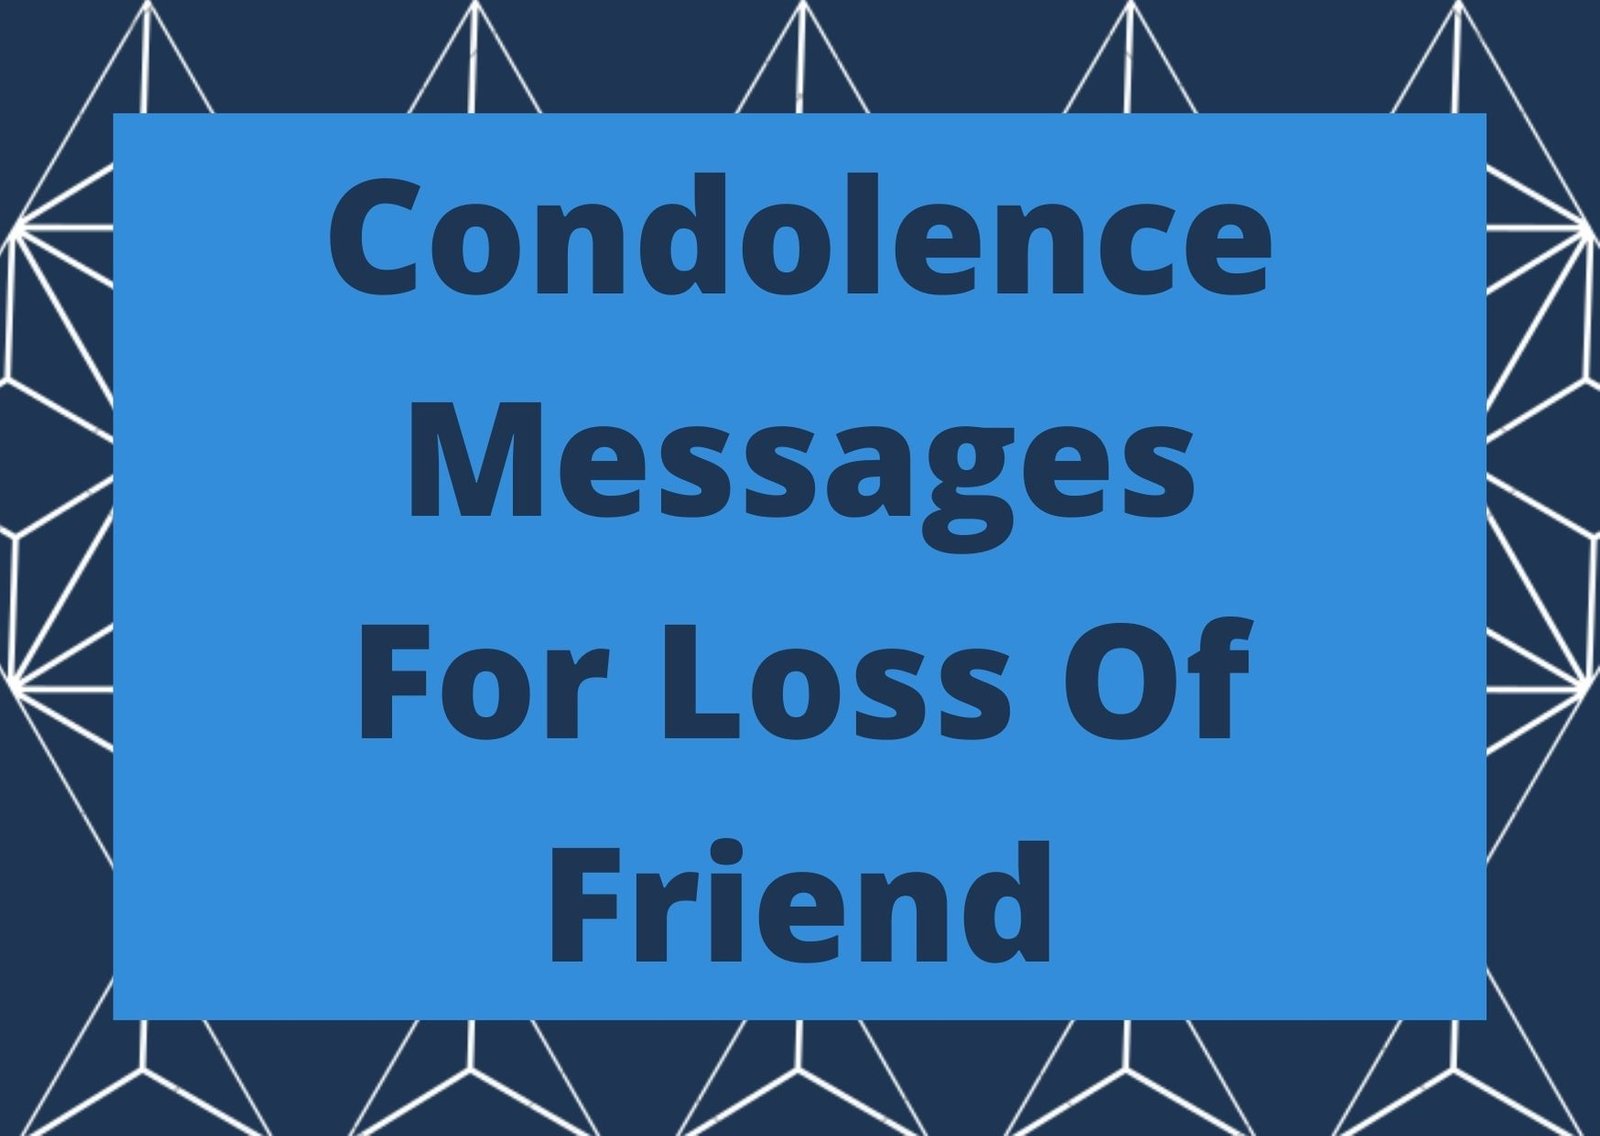 condolence messages for loss of friend